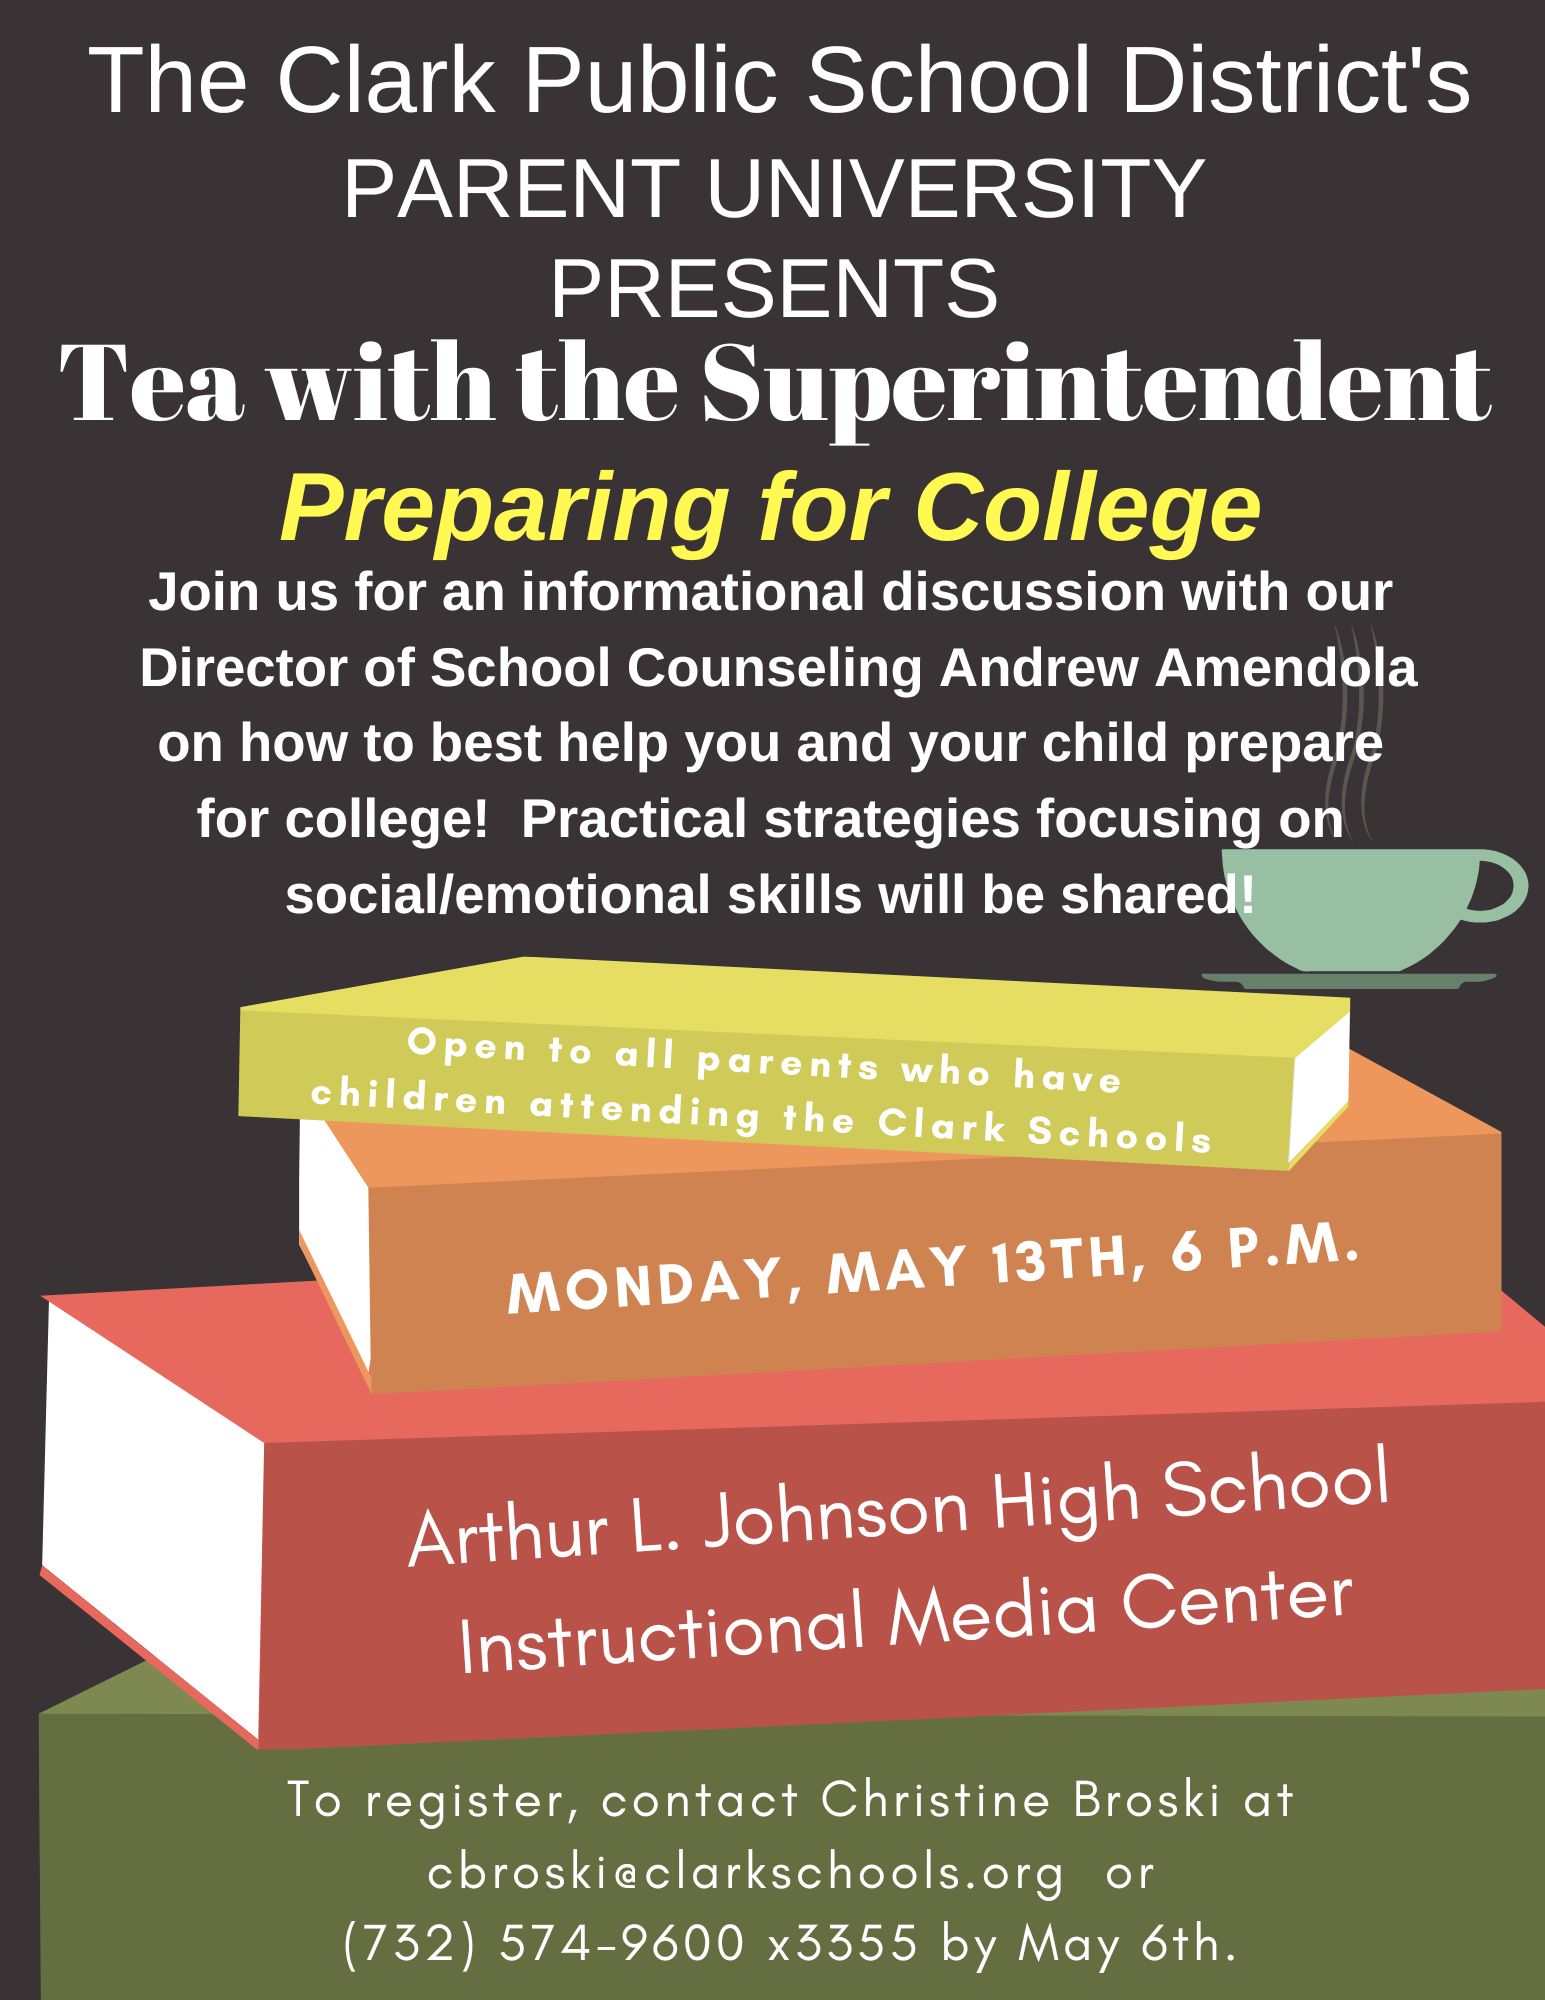 Parent University Presents “Preparing for College” Informational Discussion – May 13th